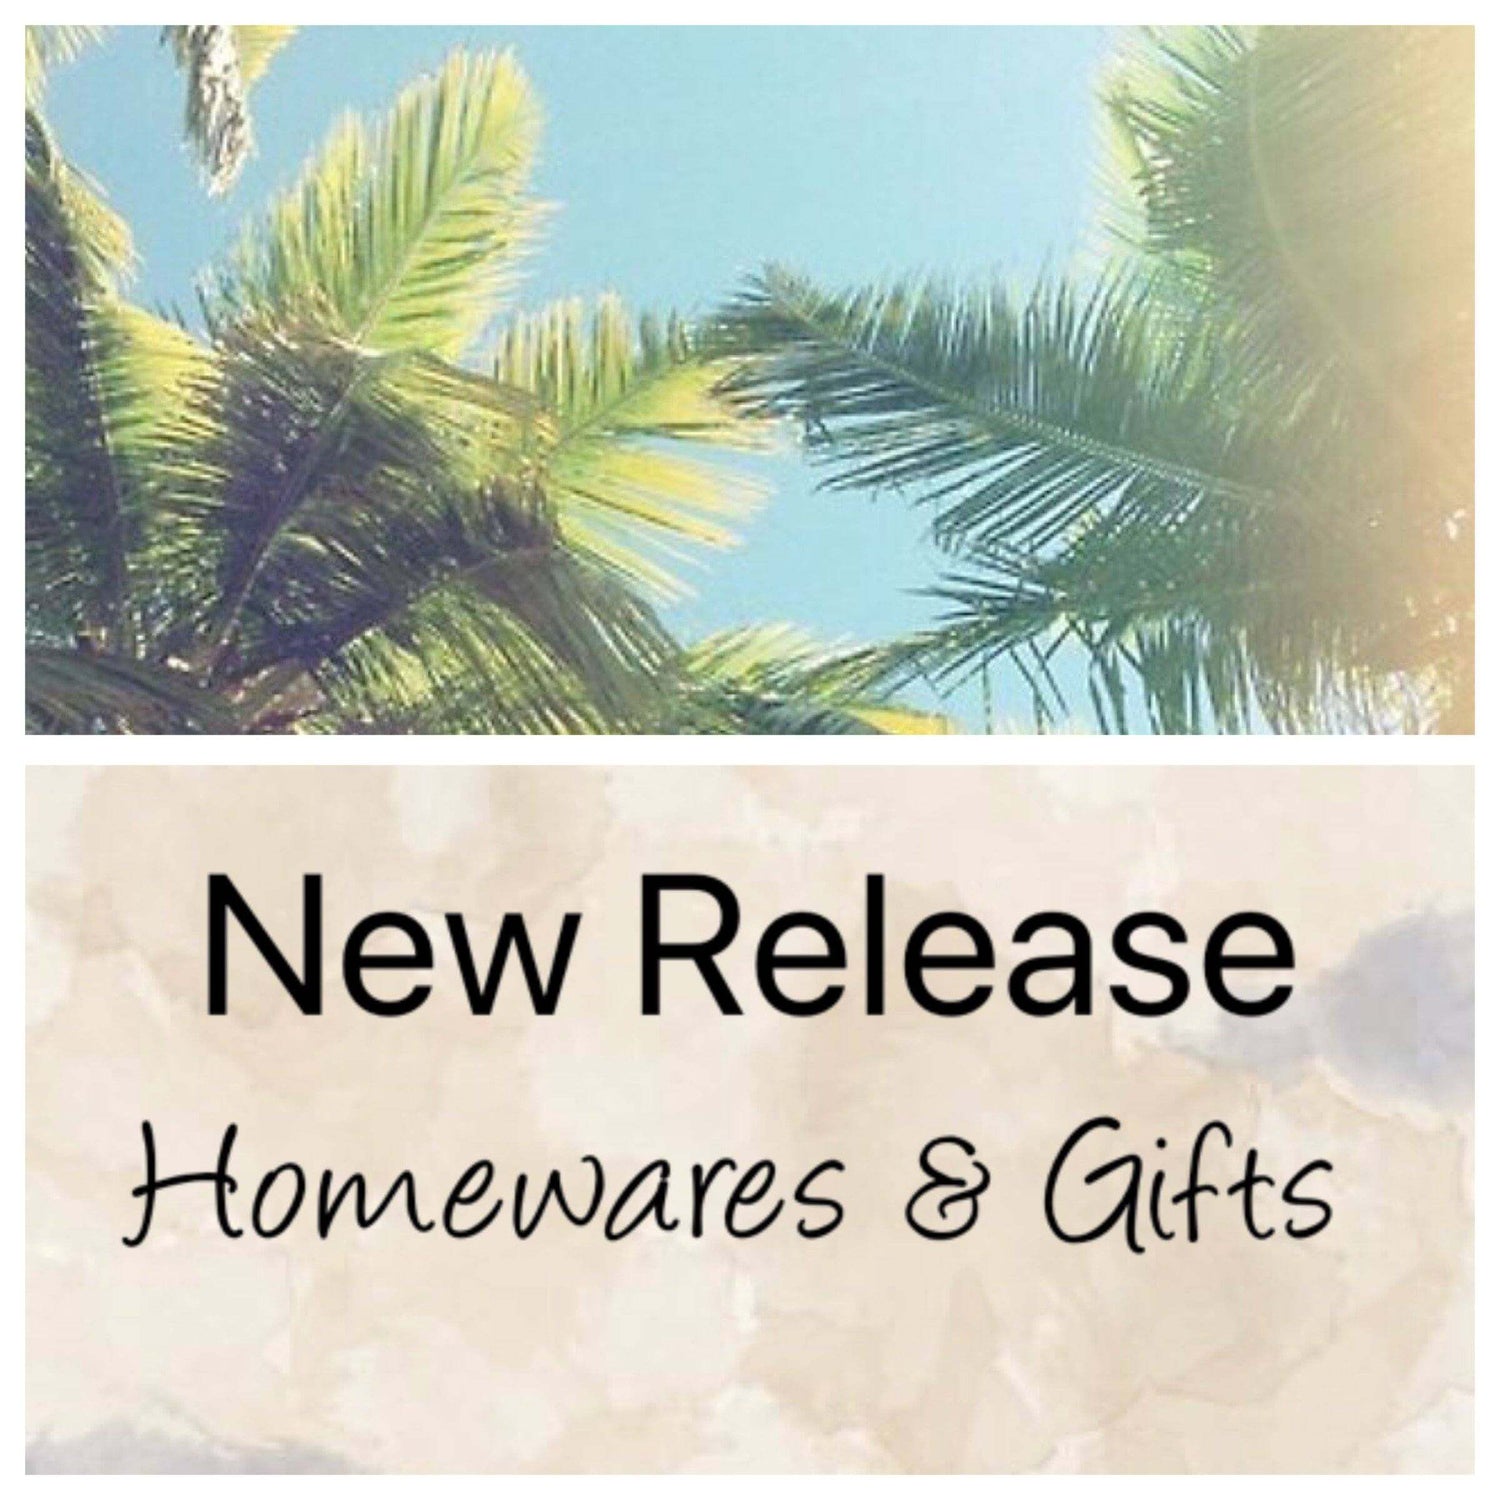 New Release Homewares & Gifts